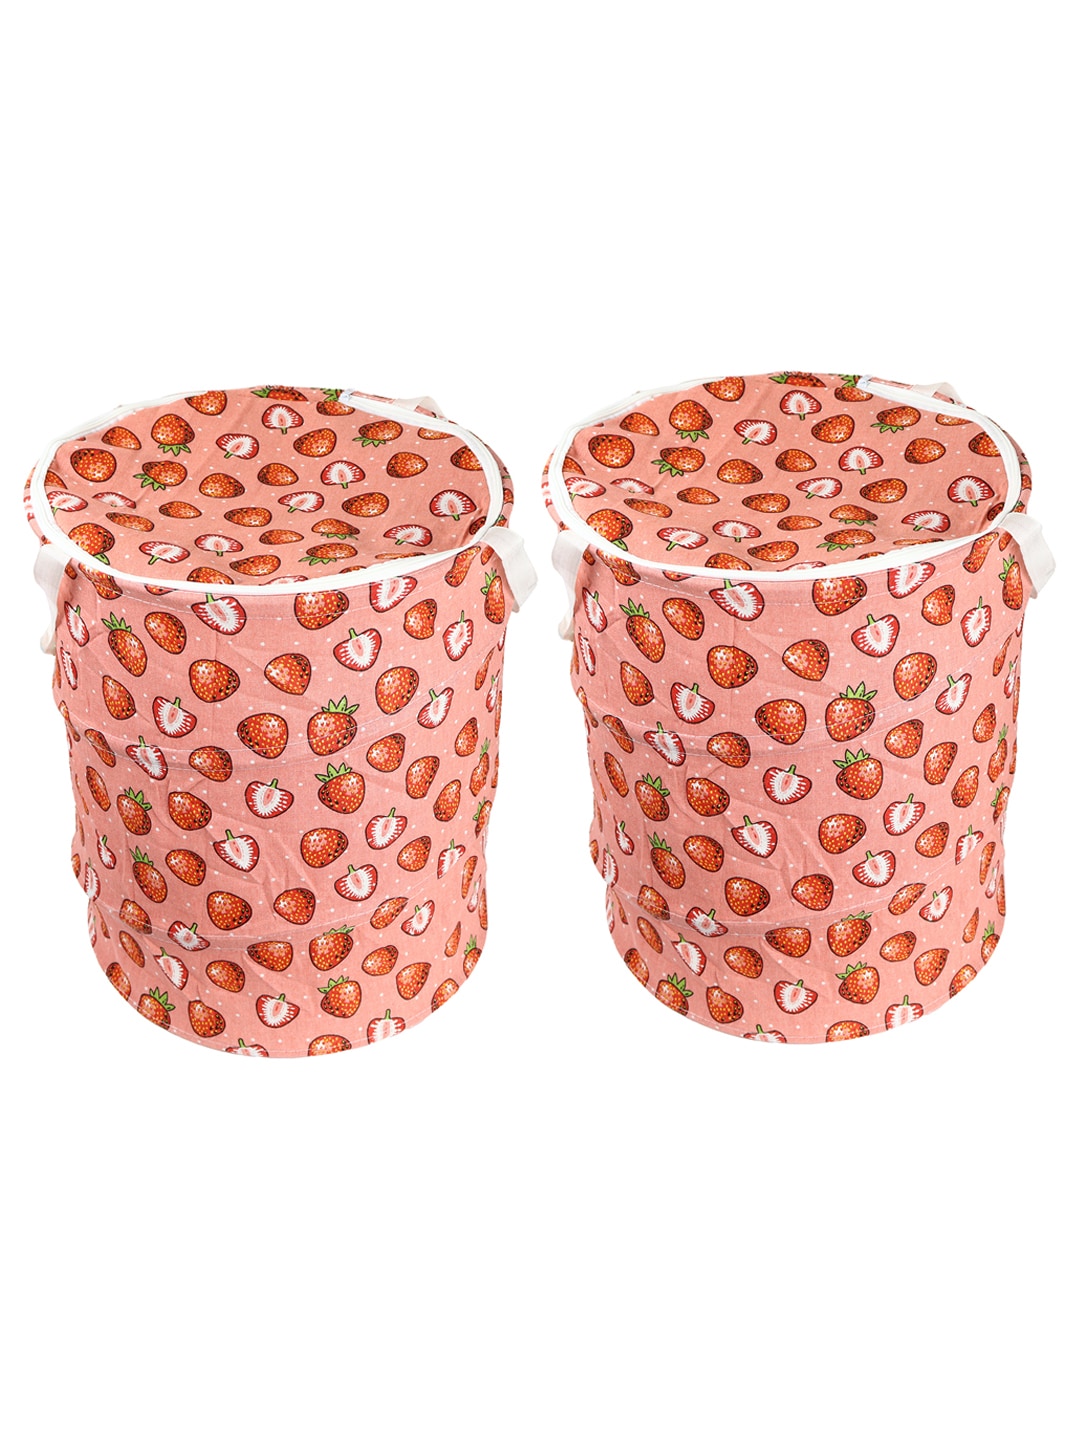 OddCroft Set Of 2 Printed Foldable Laundry Baskets Price in India